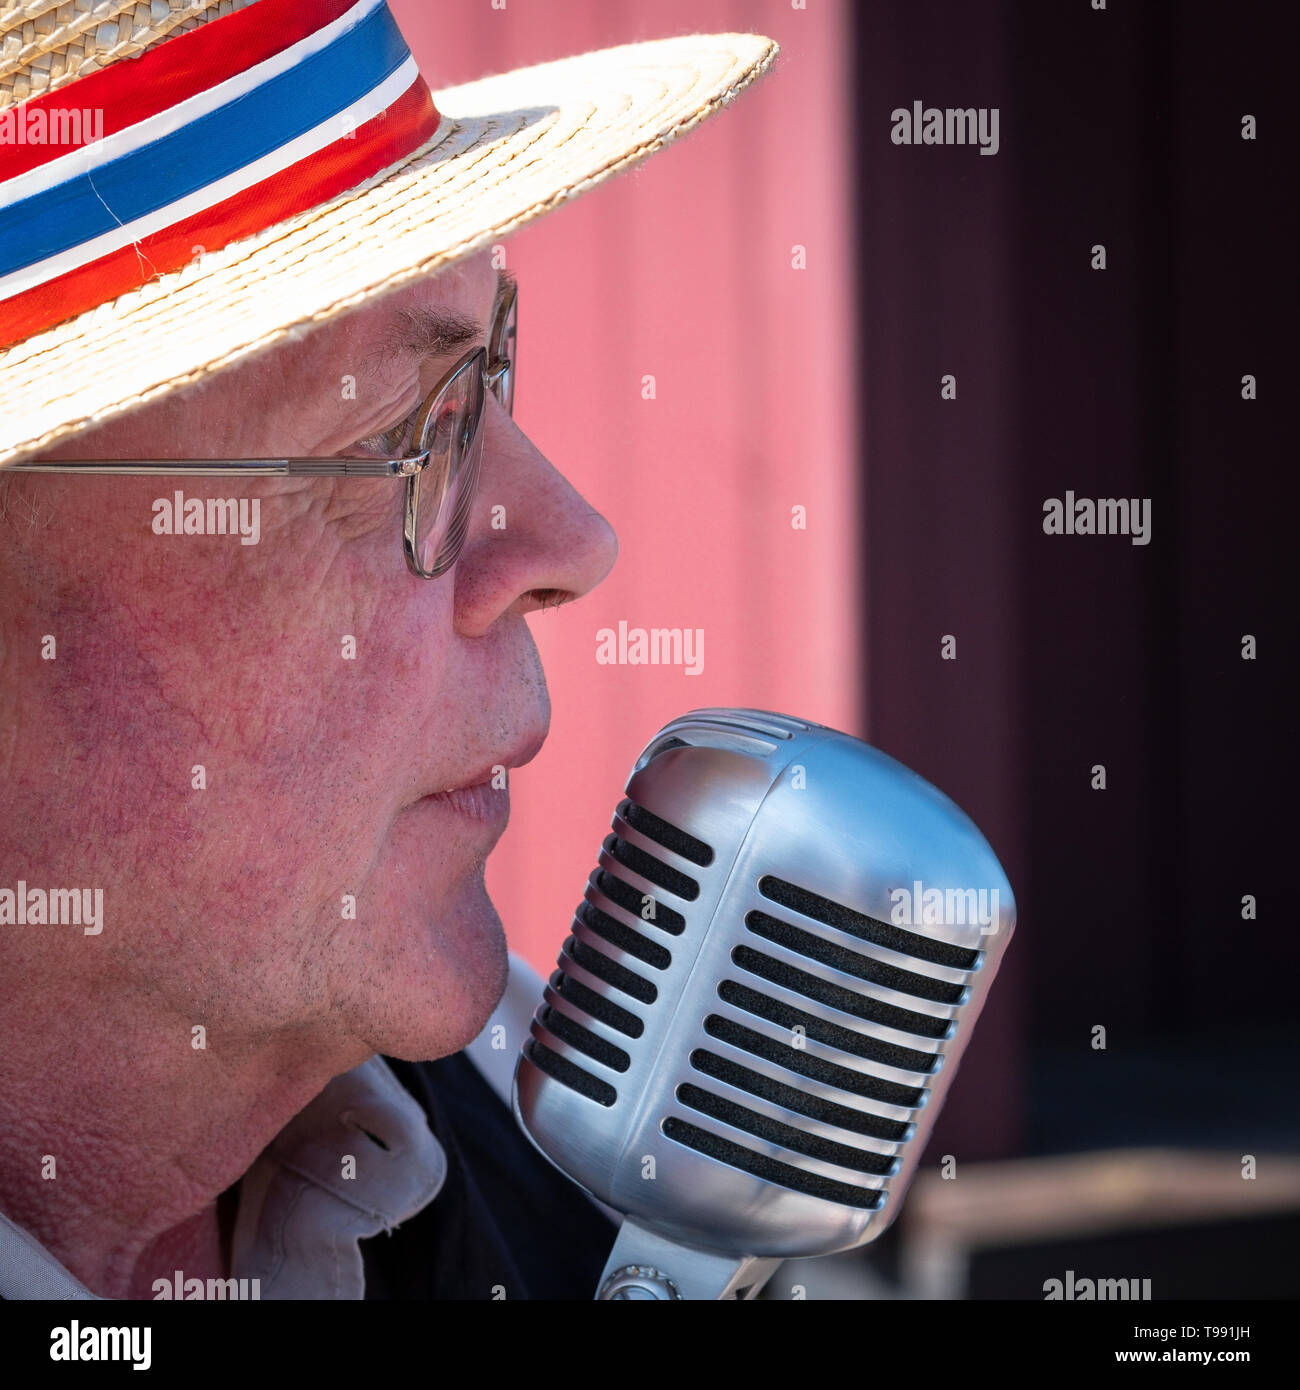 Old time singer at a steam engine rally. Stock Photo